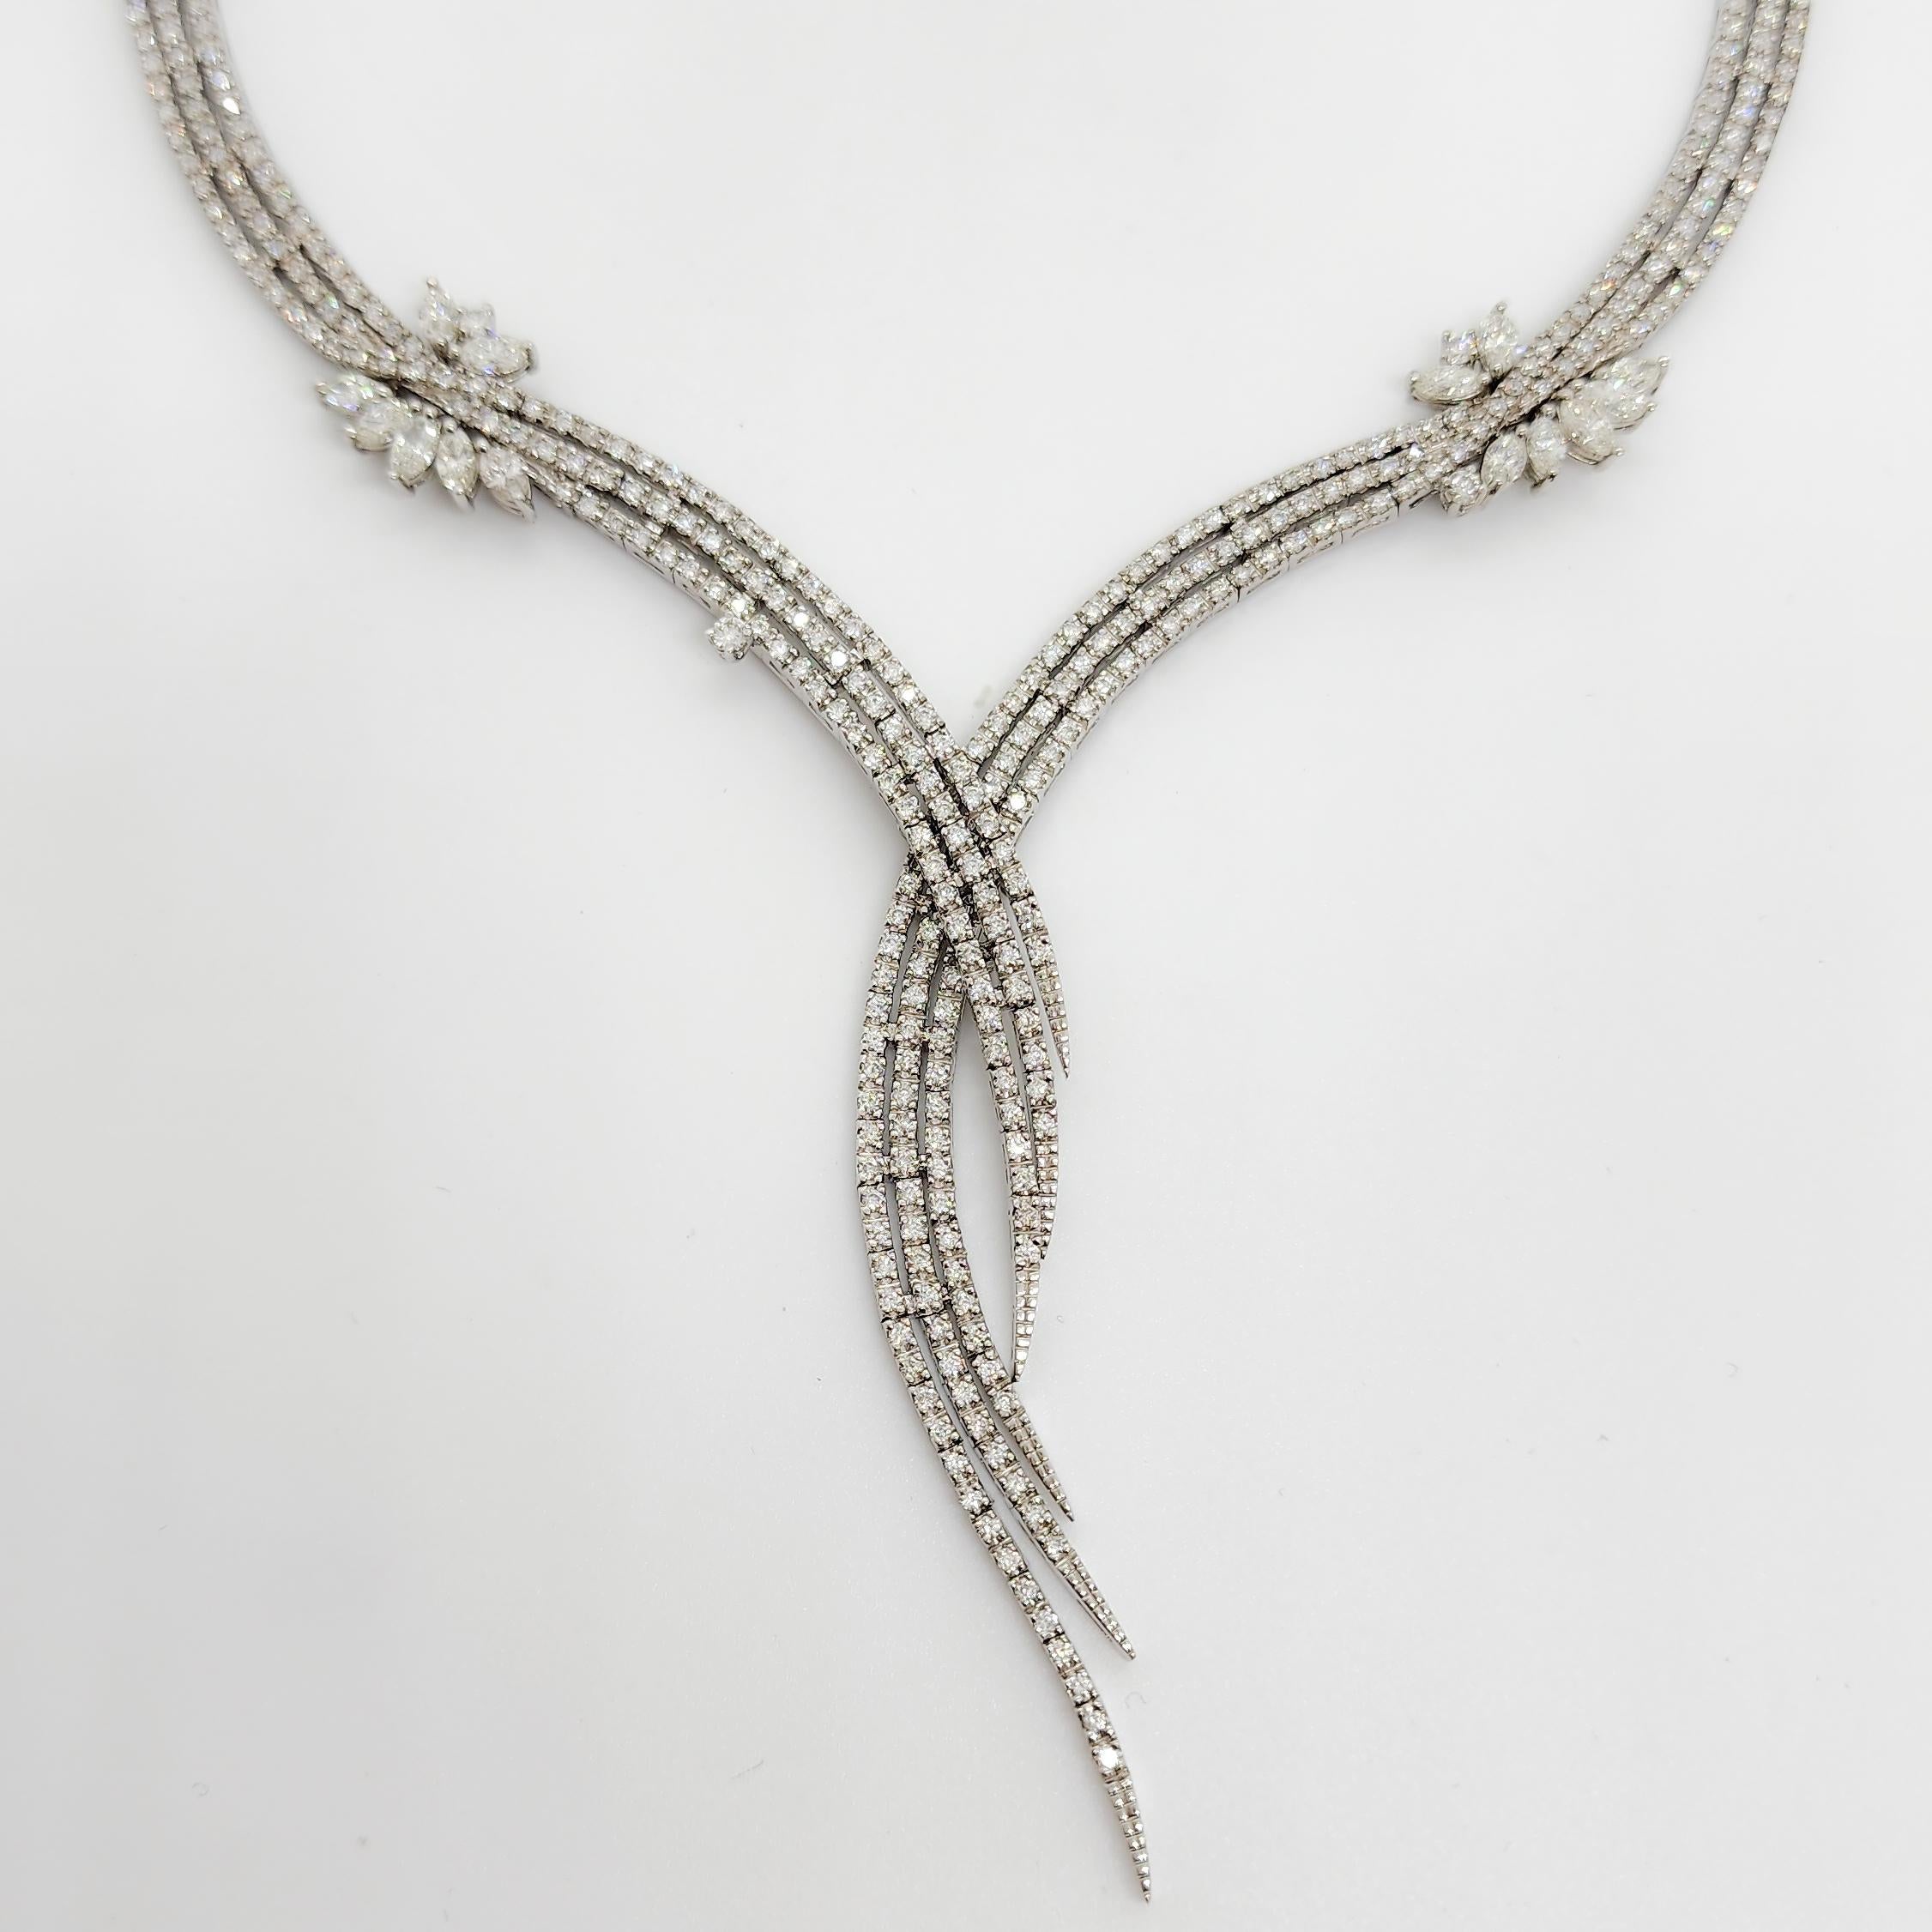 Gorgeous 12.00 ct. white diamond rounds and marquise shapes.  Handmade in 14k white gold.  This necklace is a showstopper and perfect for any occasion!